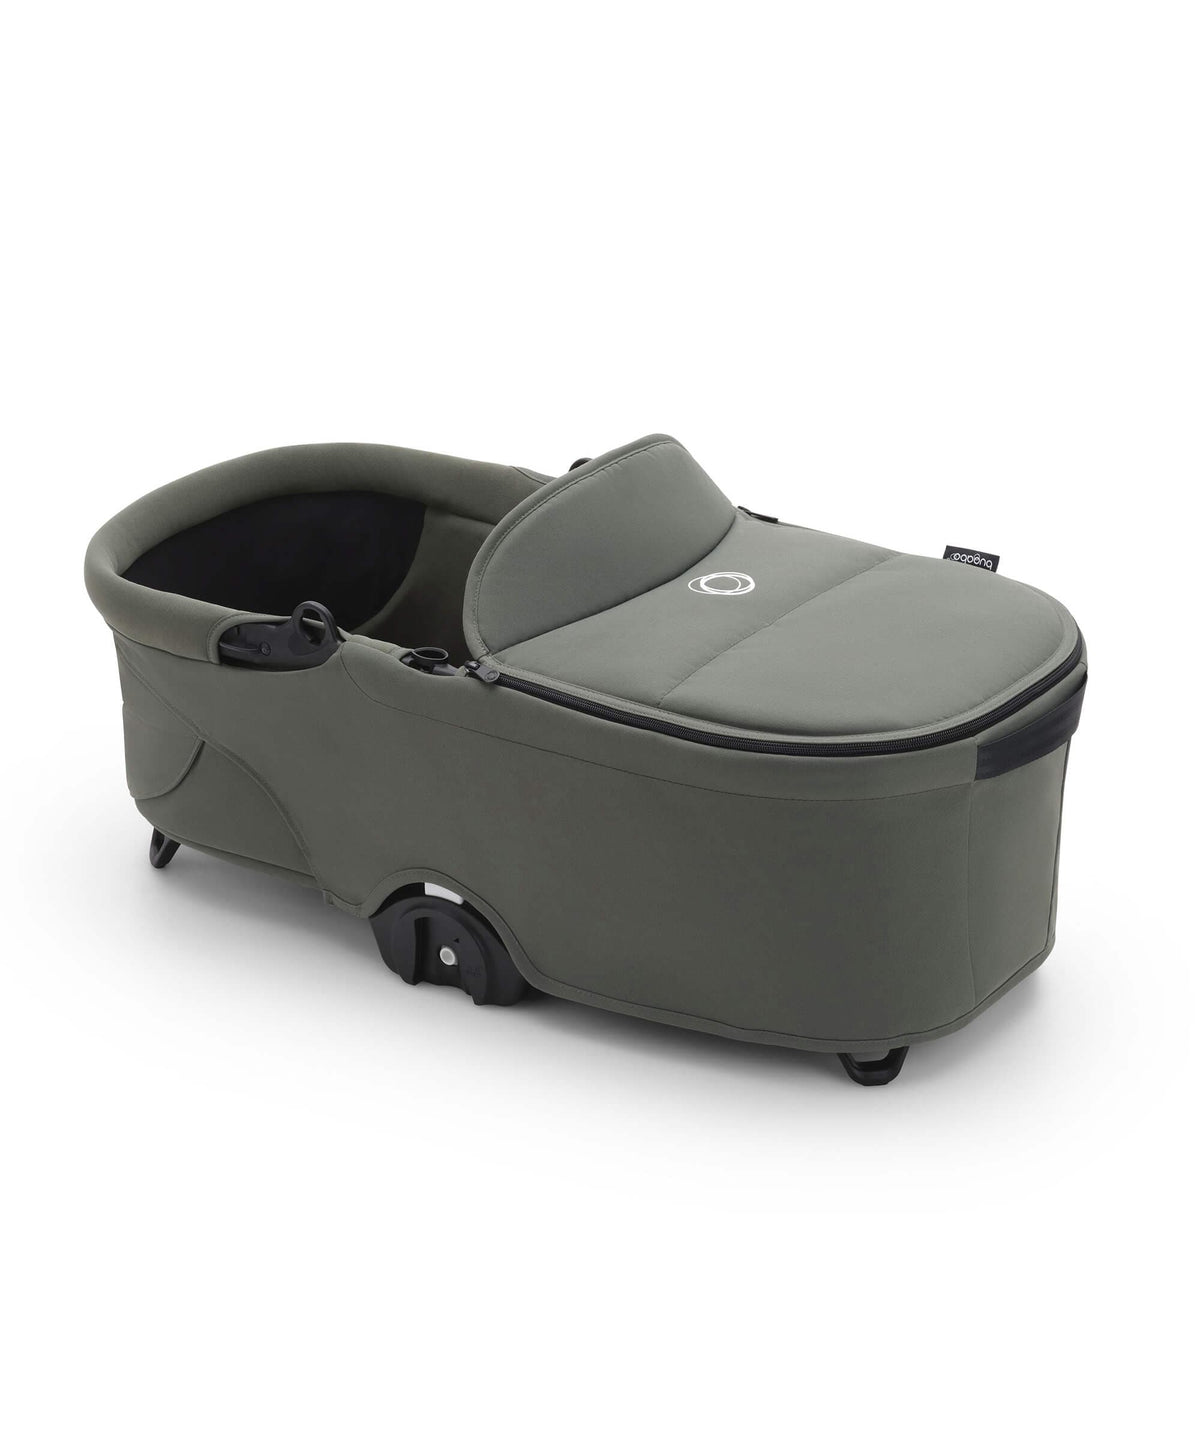 Bugaboo Dragonfly Carrycot Complete in Forest Green 窶� Mamas  Papas UK